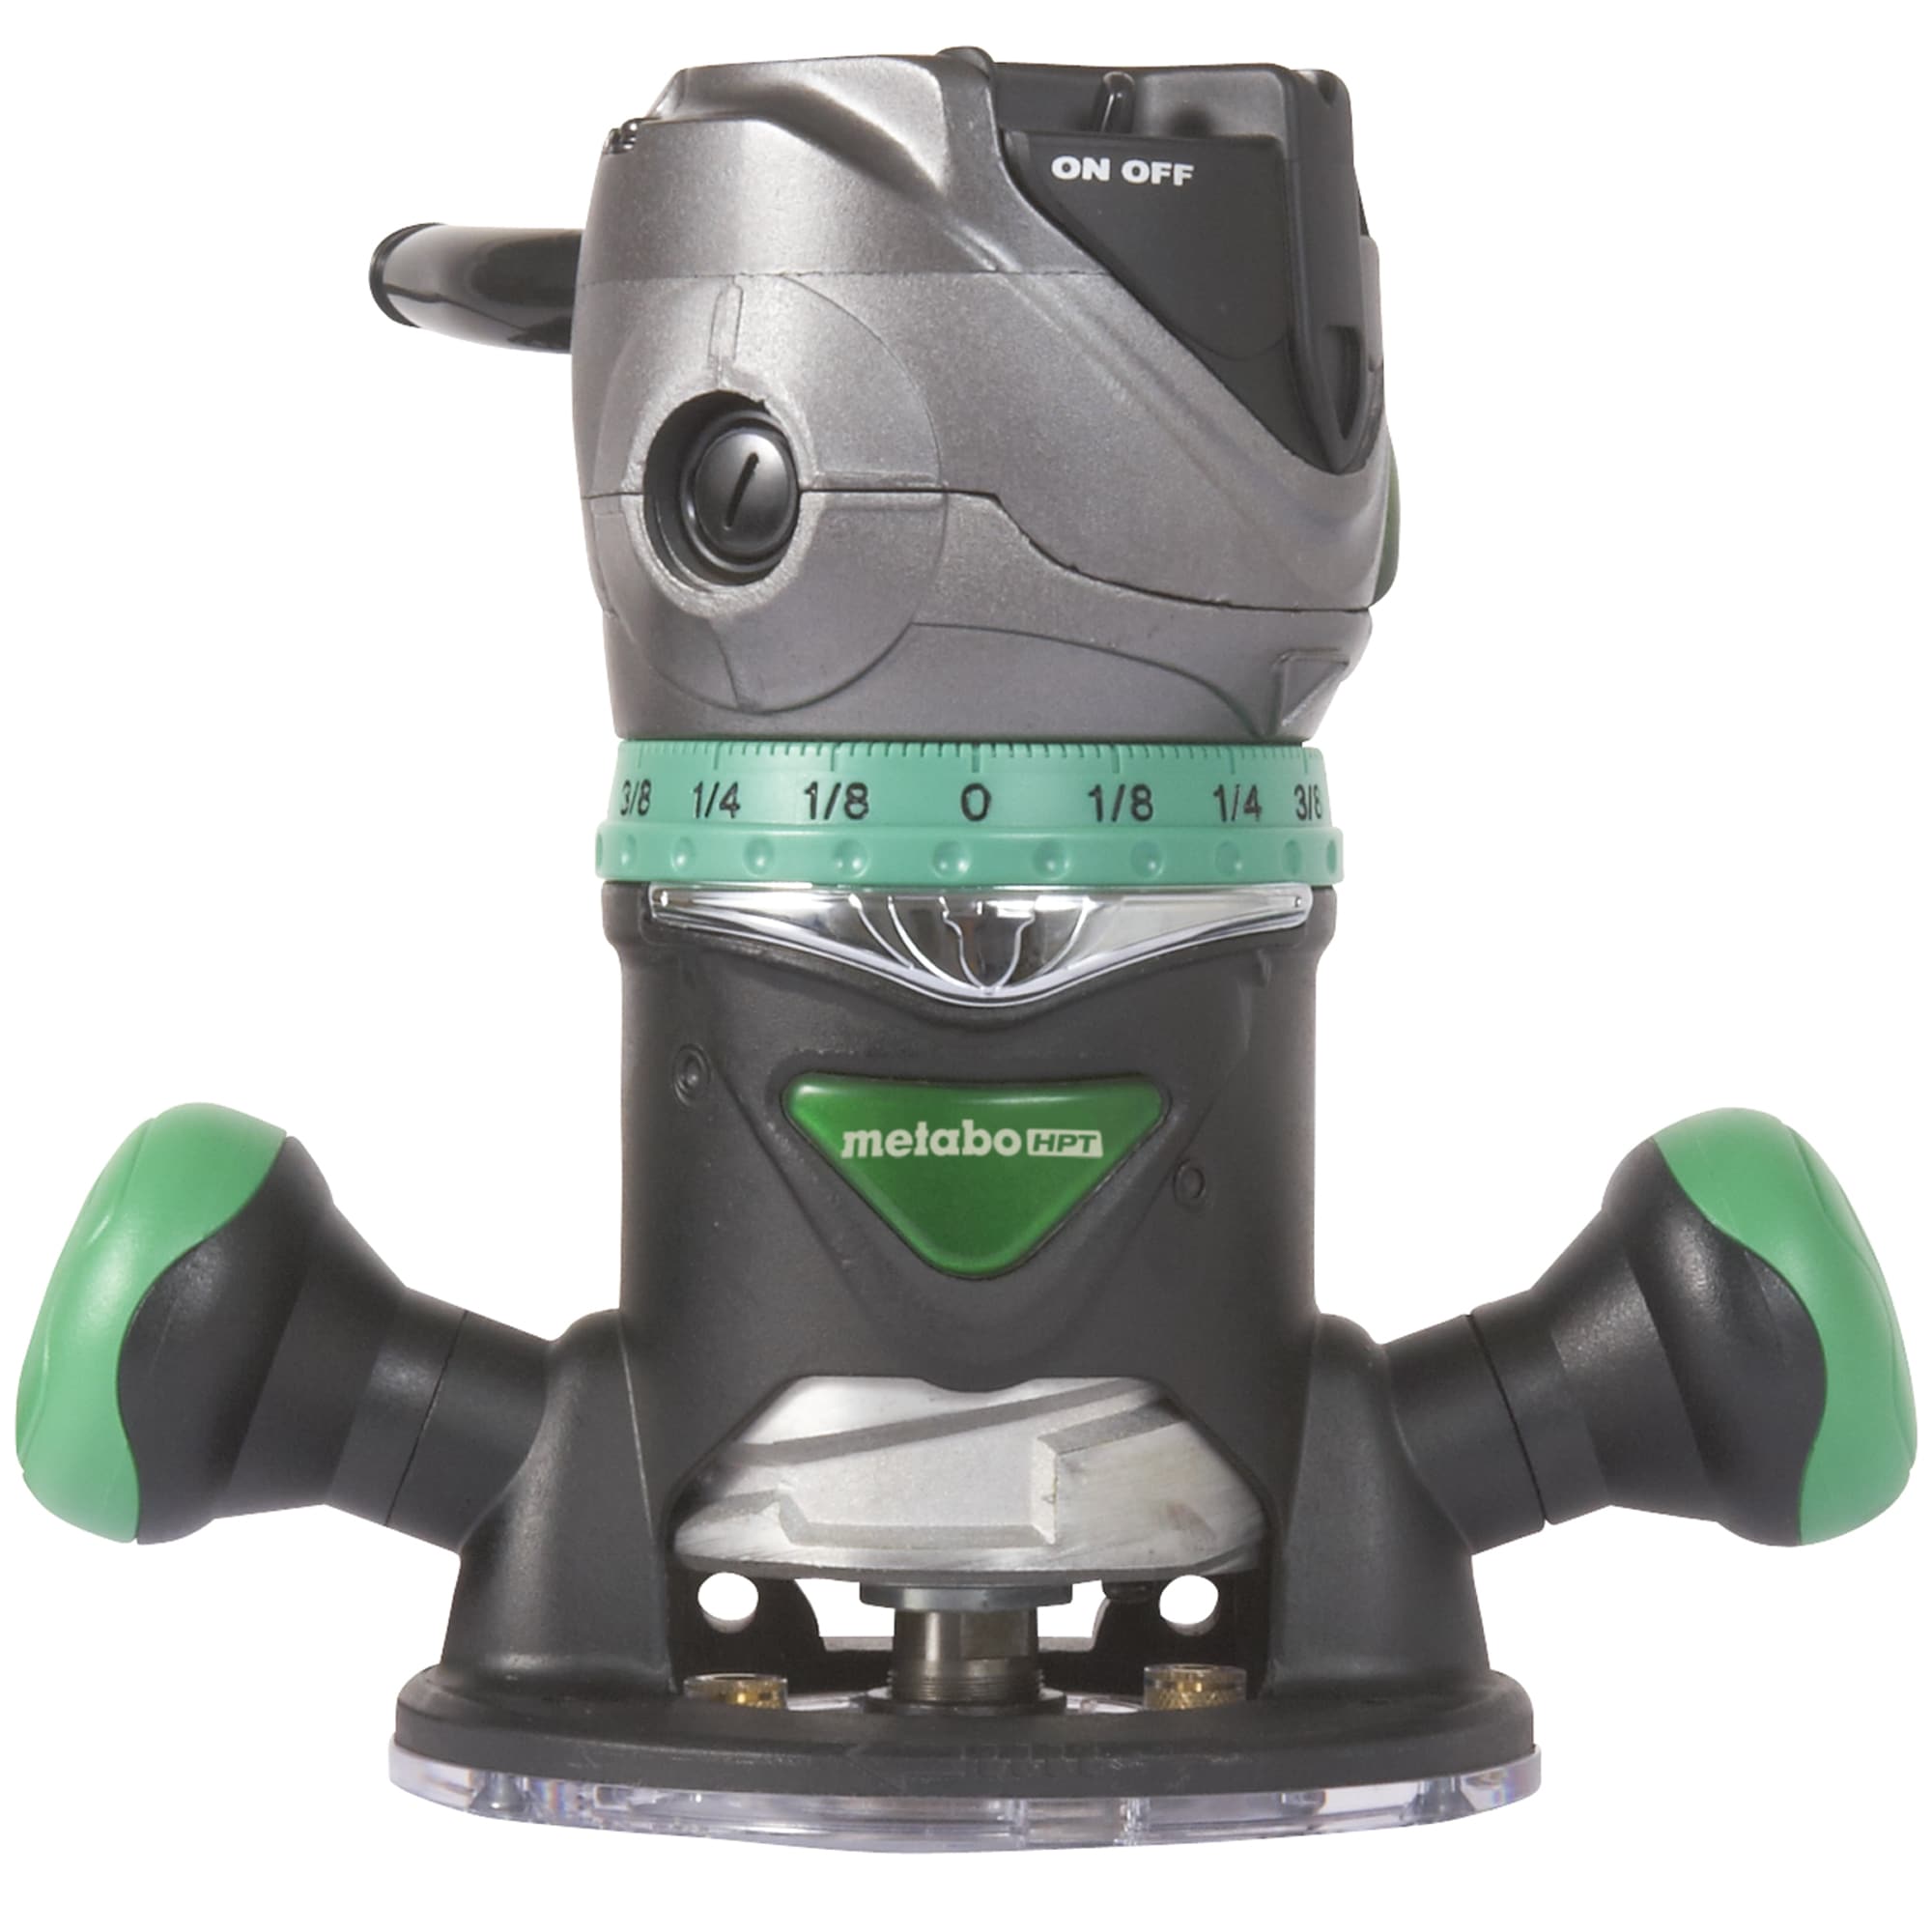 Metabo HPT 1/4" 2.25-HP Variable Speed Fixed Corded Router $69 + Free Shipping